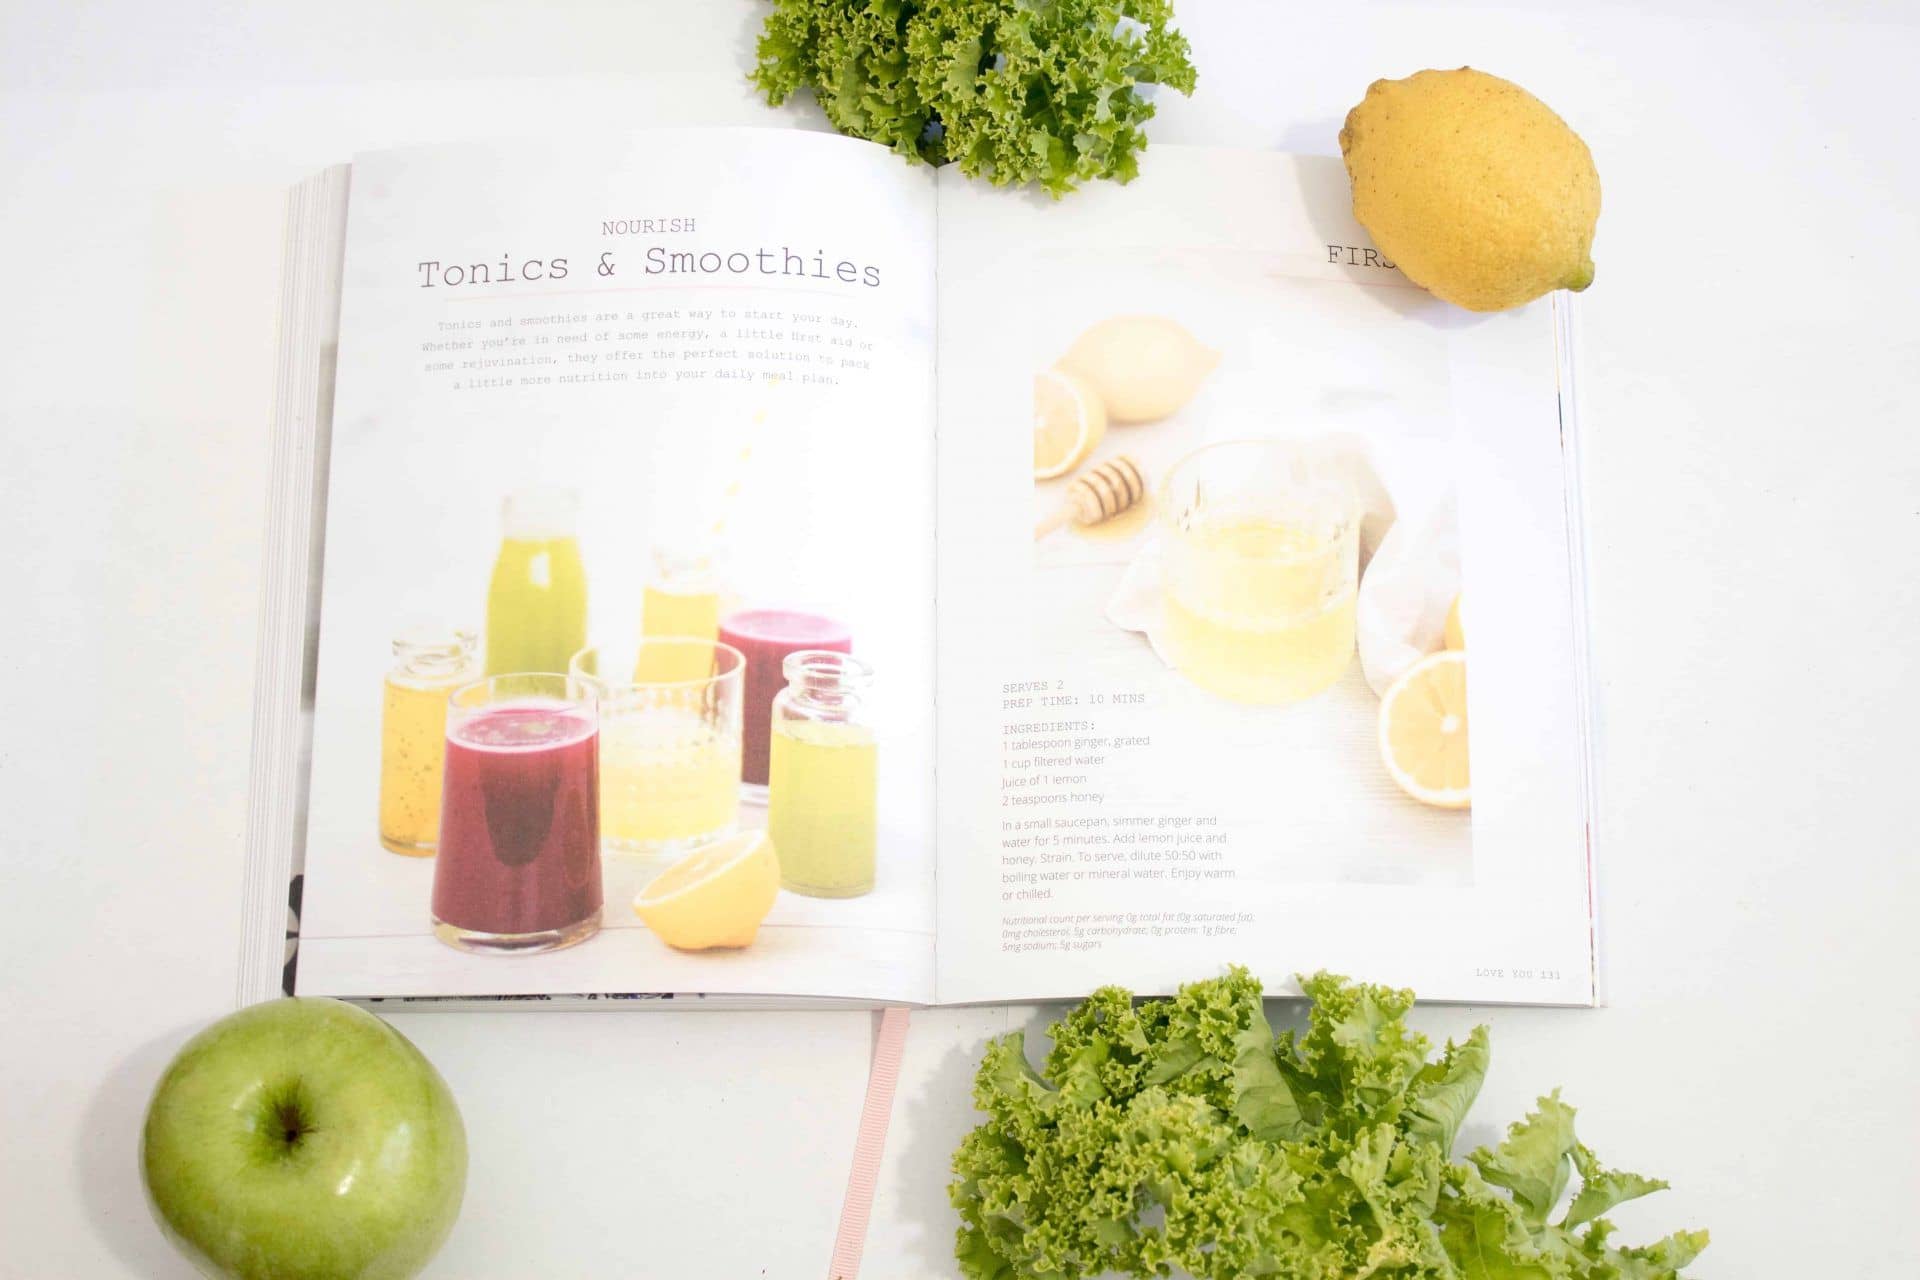 Open vegan smoothie cookbook with ingredients kale, lemon, and apple sitting next book